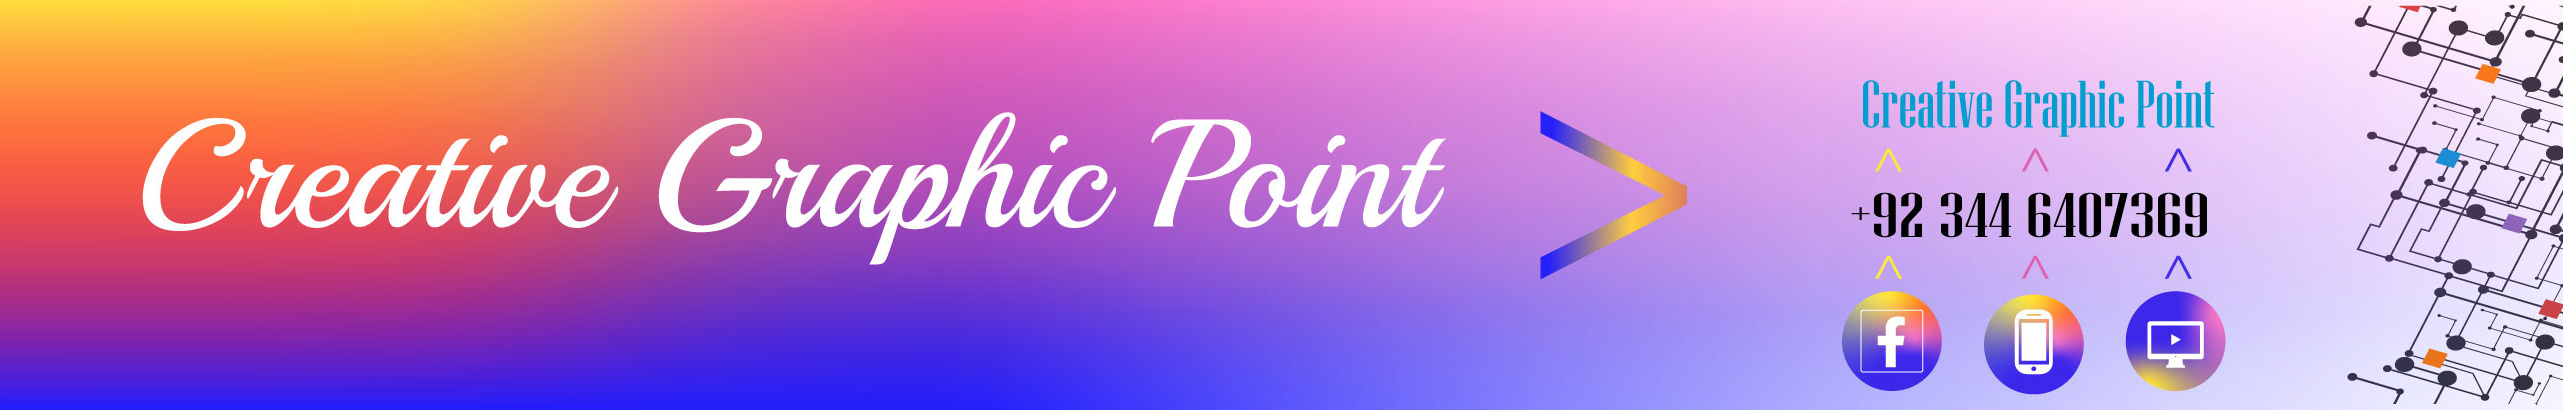 Creative Graphic point's profile banner